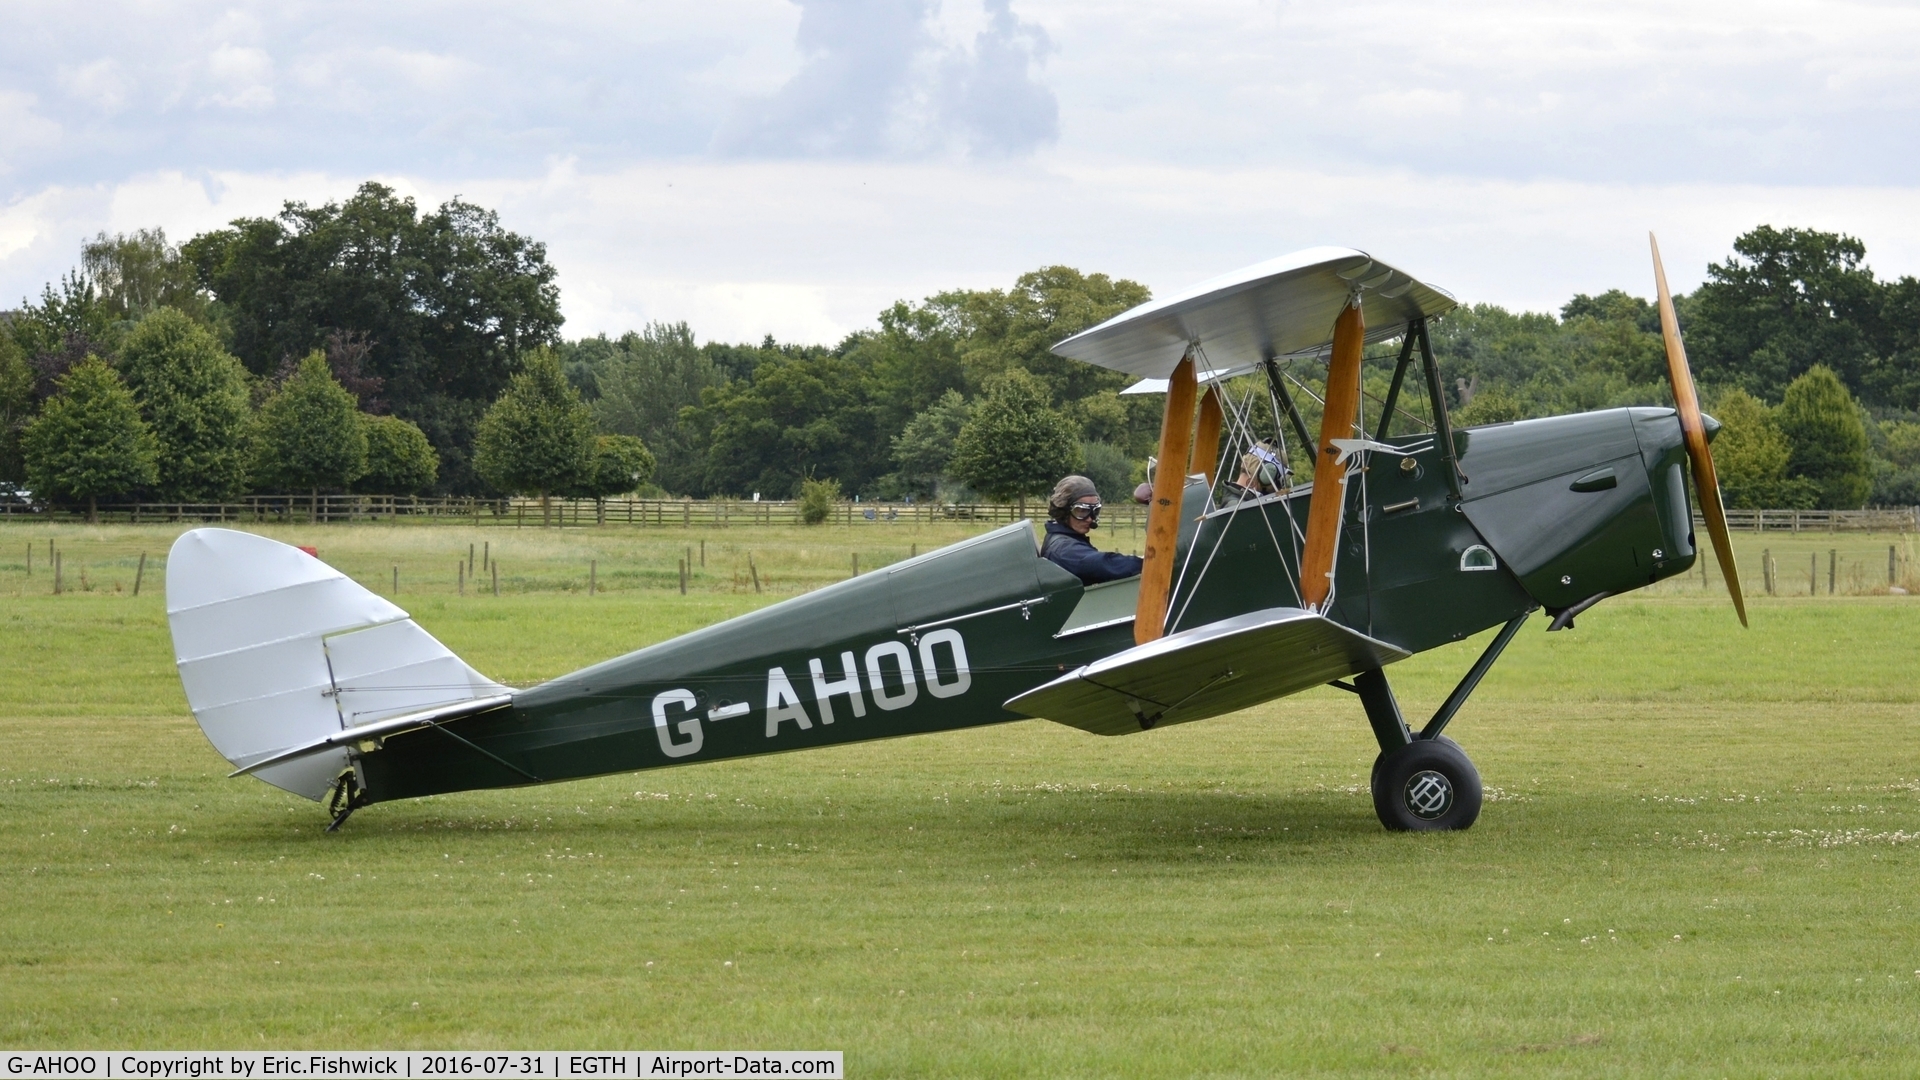 G-AHOO, 1943 De Havilland DH-82A Tiger Moth II C/N 86149, x. G-AHOO at 'A Gathering of Moths,' Old Warden Aerodrome, Beds.